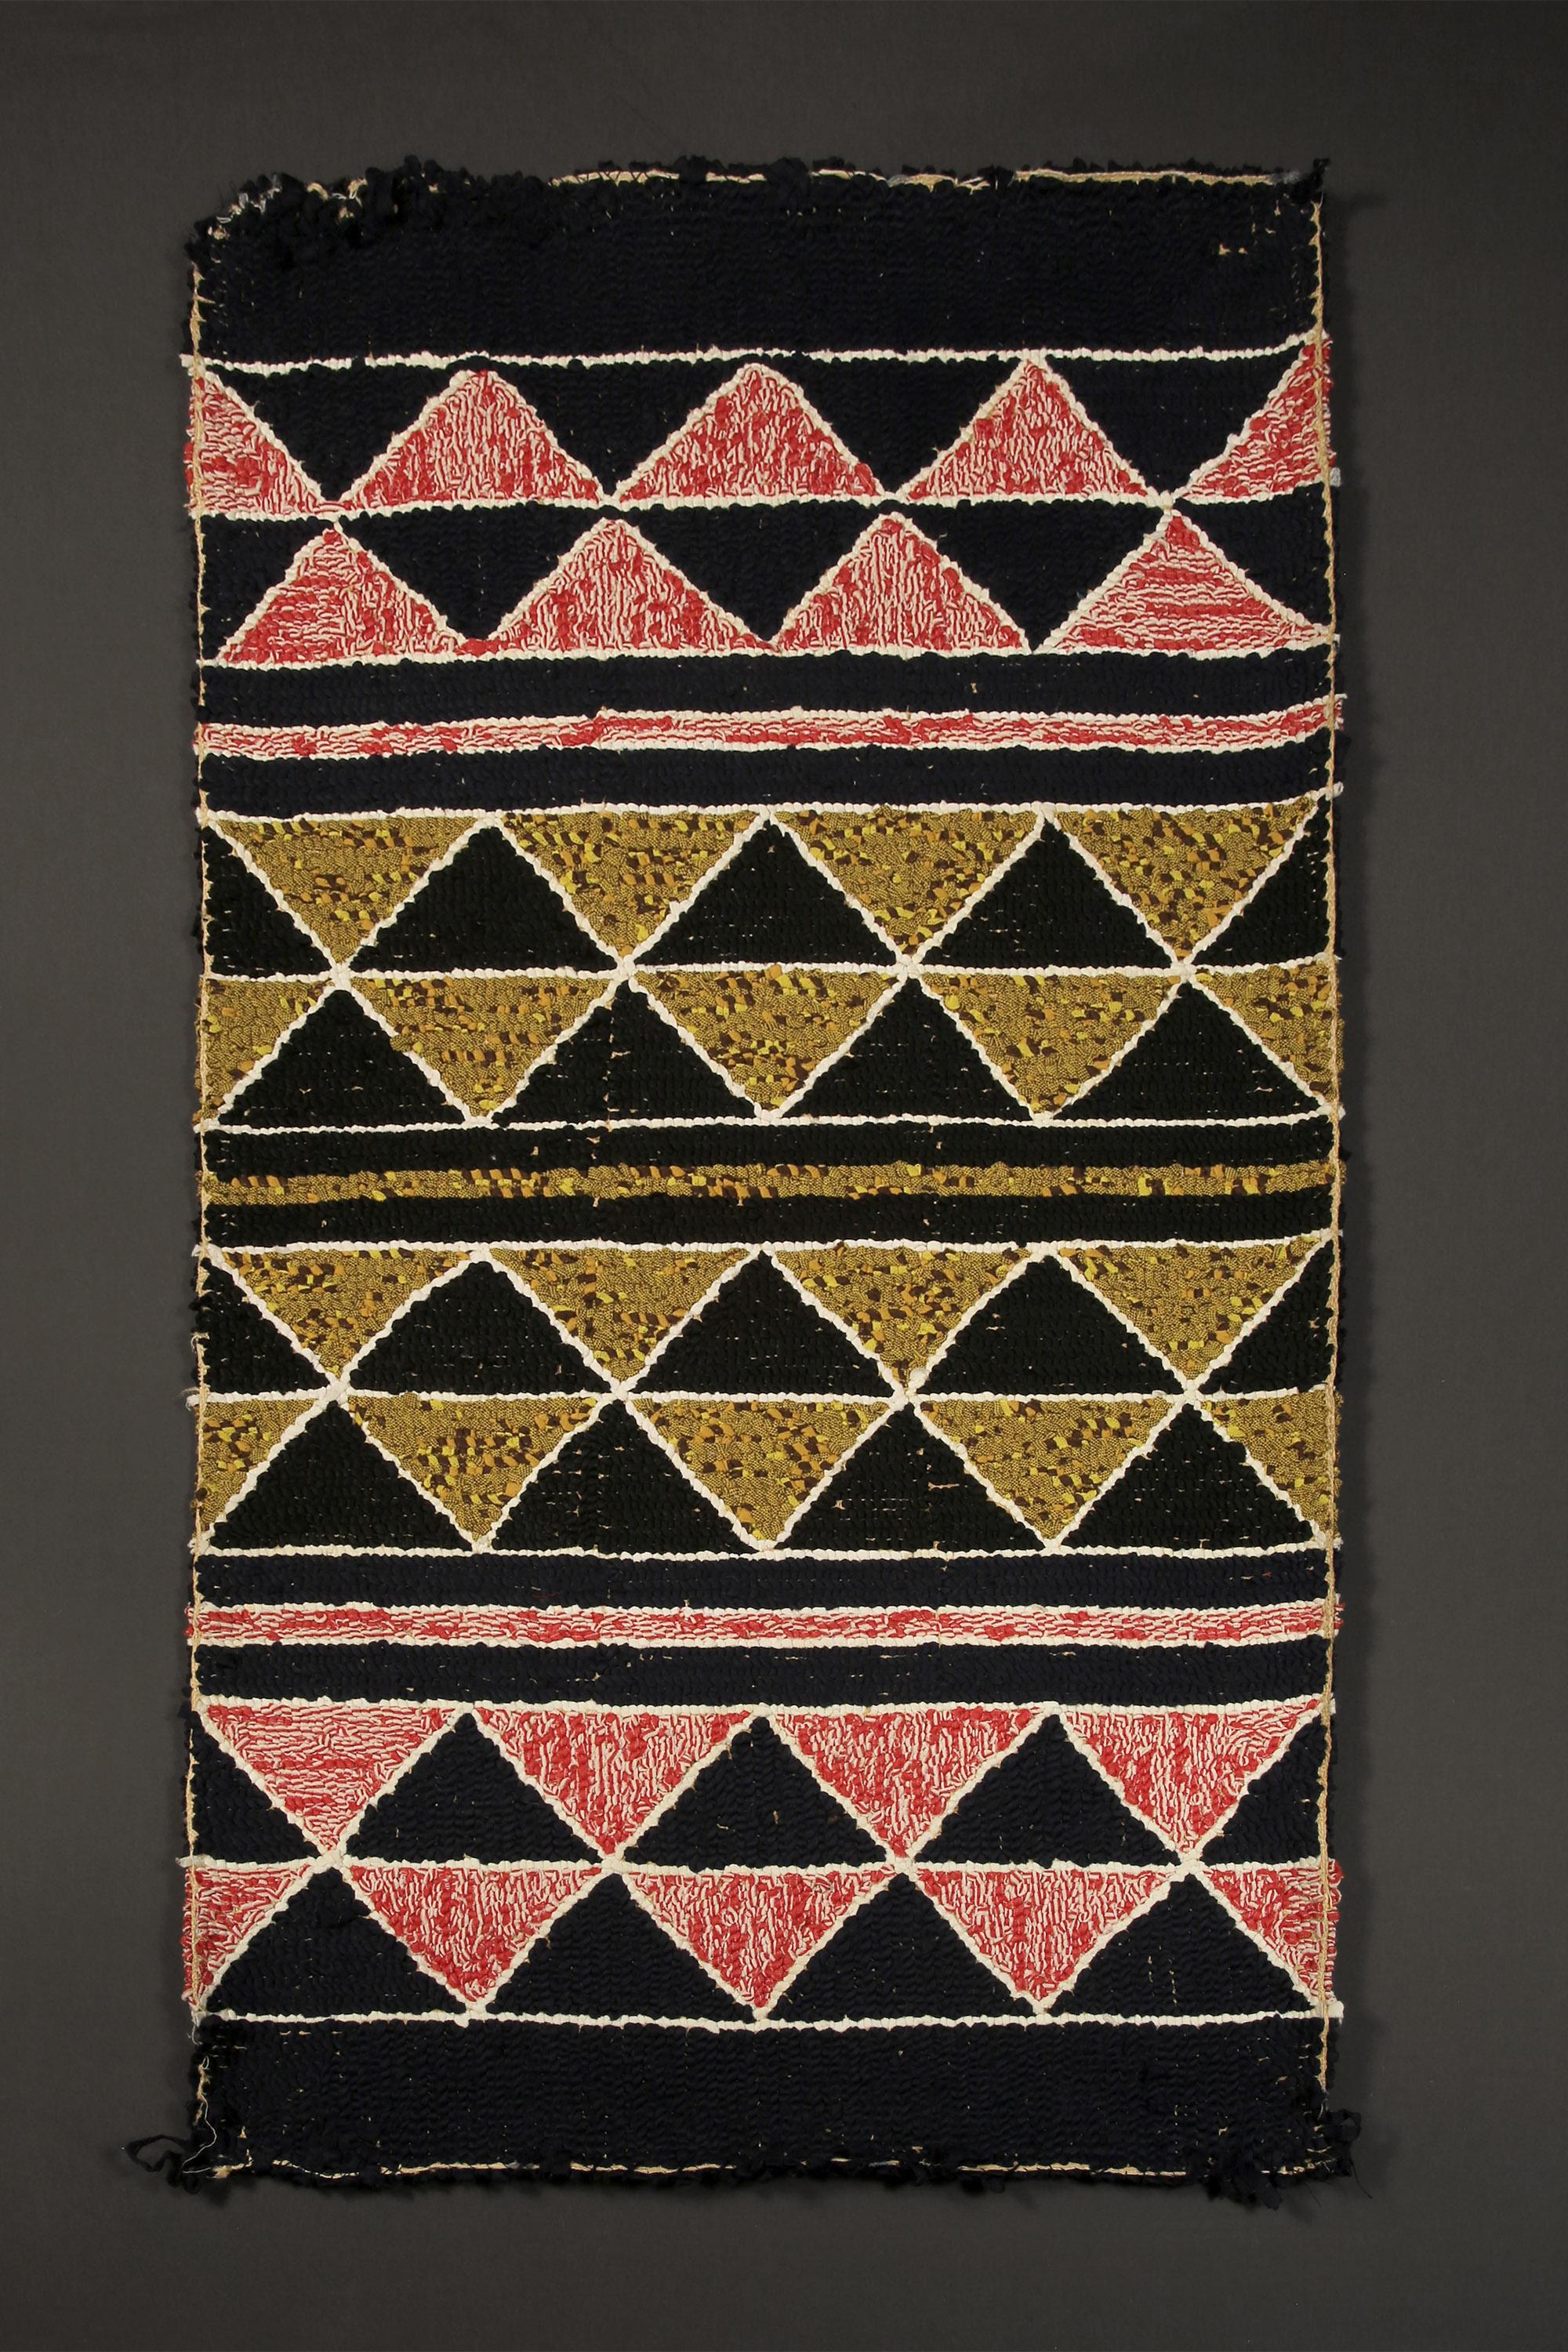 Produced by traditional methods, this American hooked rug features classical repeating geometric patterns of the early mid-century. 

American hooked rug
Reciprocating triangle motif
Mid-20th century (1940s' or earlier) 
Measures: 40 in x 22 in.